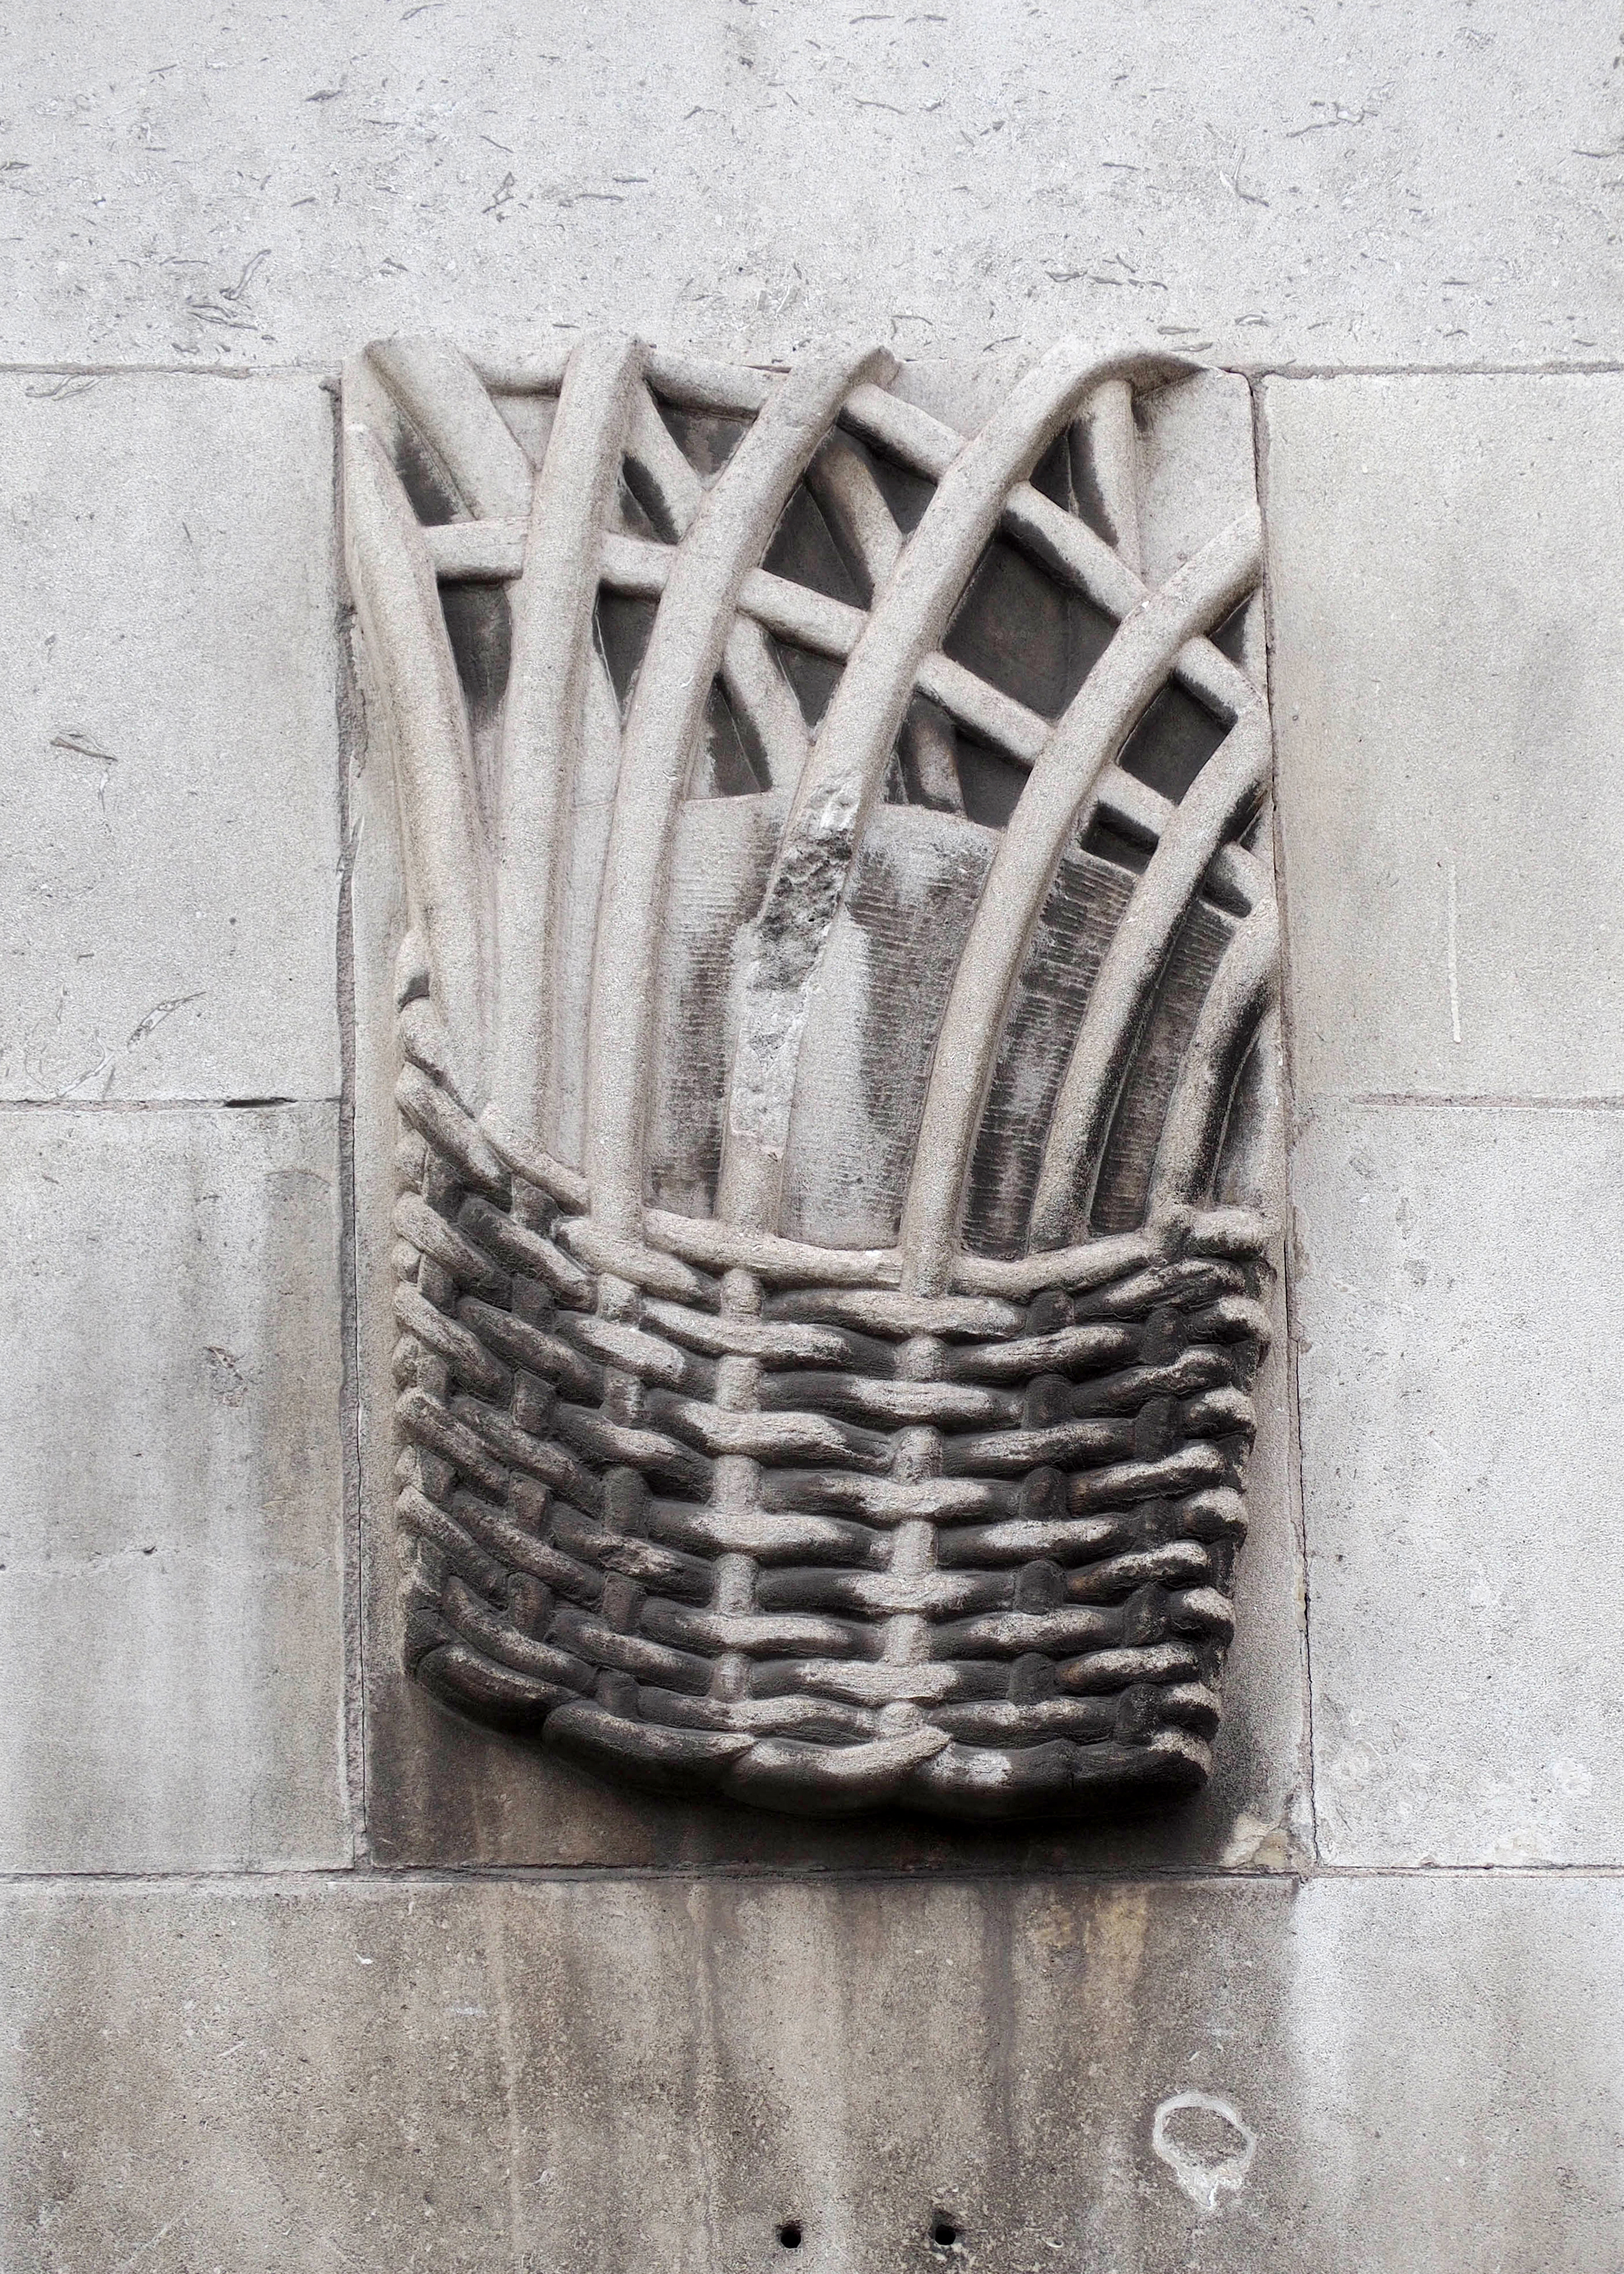 Relief from the Royal School for the Blind in Liverpool showing a woven basket.